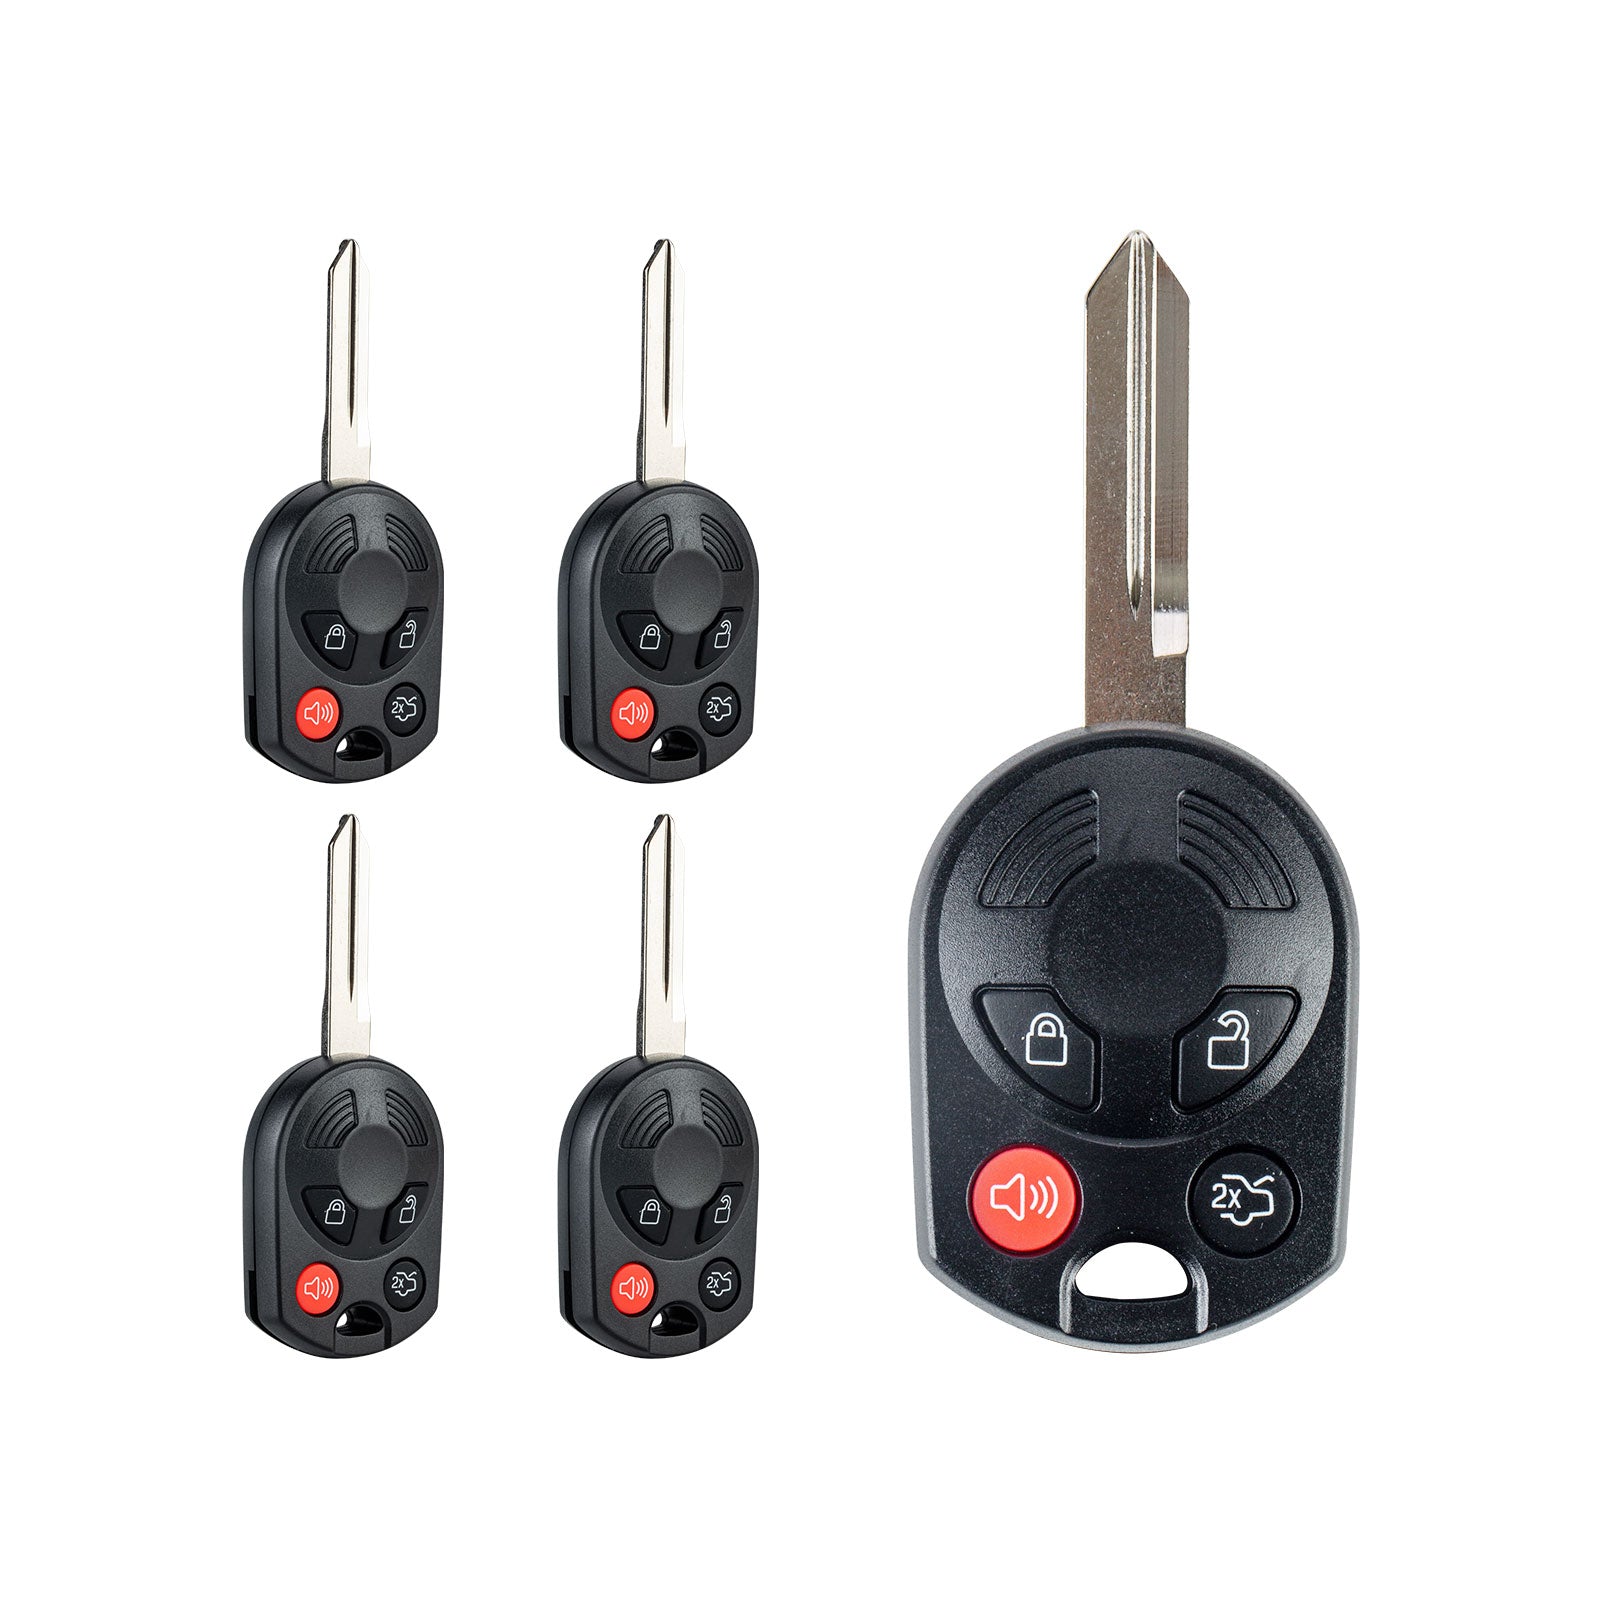 Keyless Entry Remote 315MHZ Replacement for 2005-2014 Mustang 2000-2016 Taurus 2005-2011 Town Car 80 CHIP OUCD6000022  KR-F4SA-05